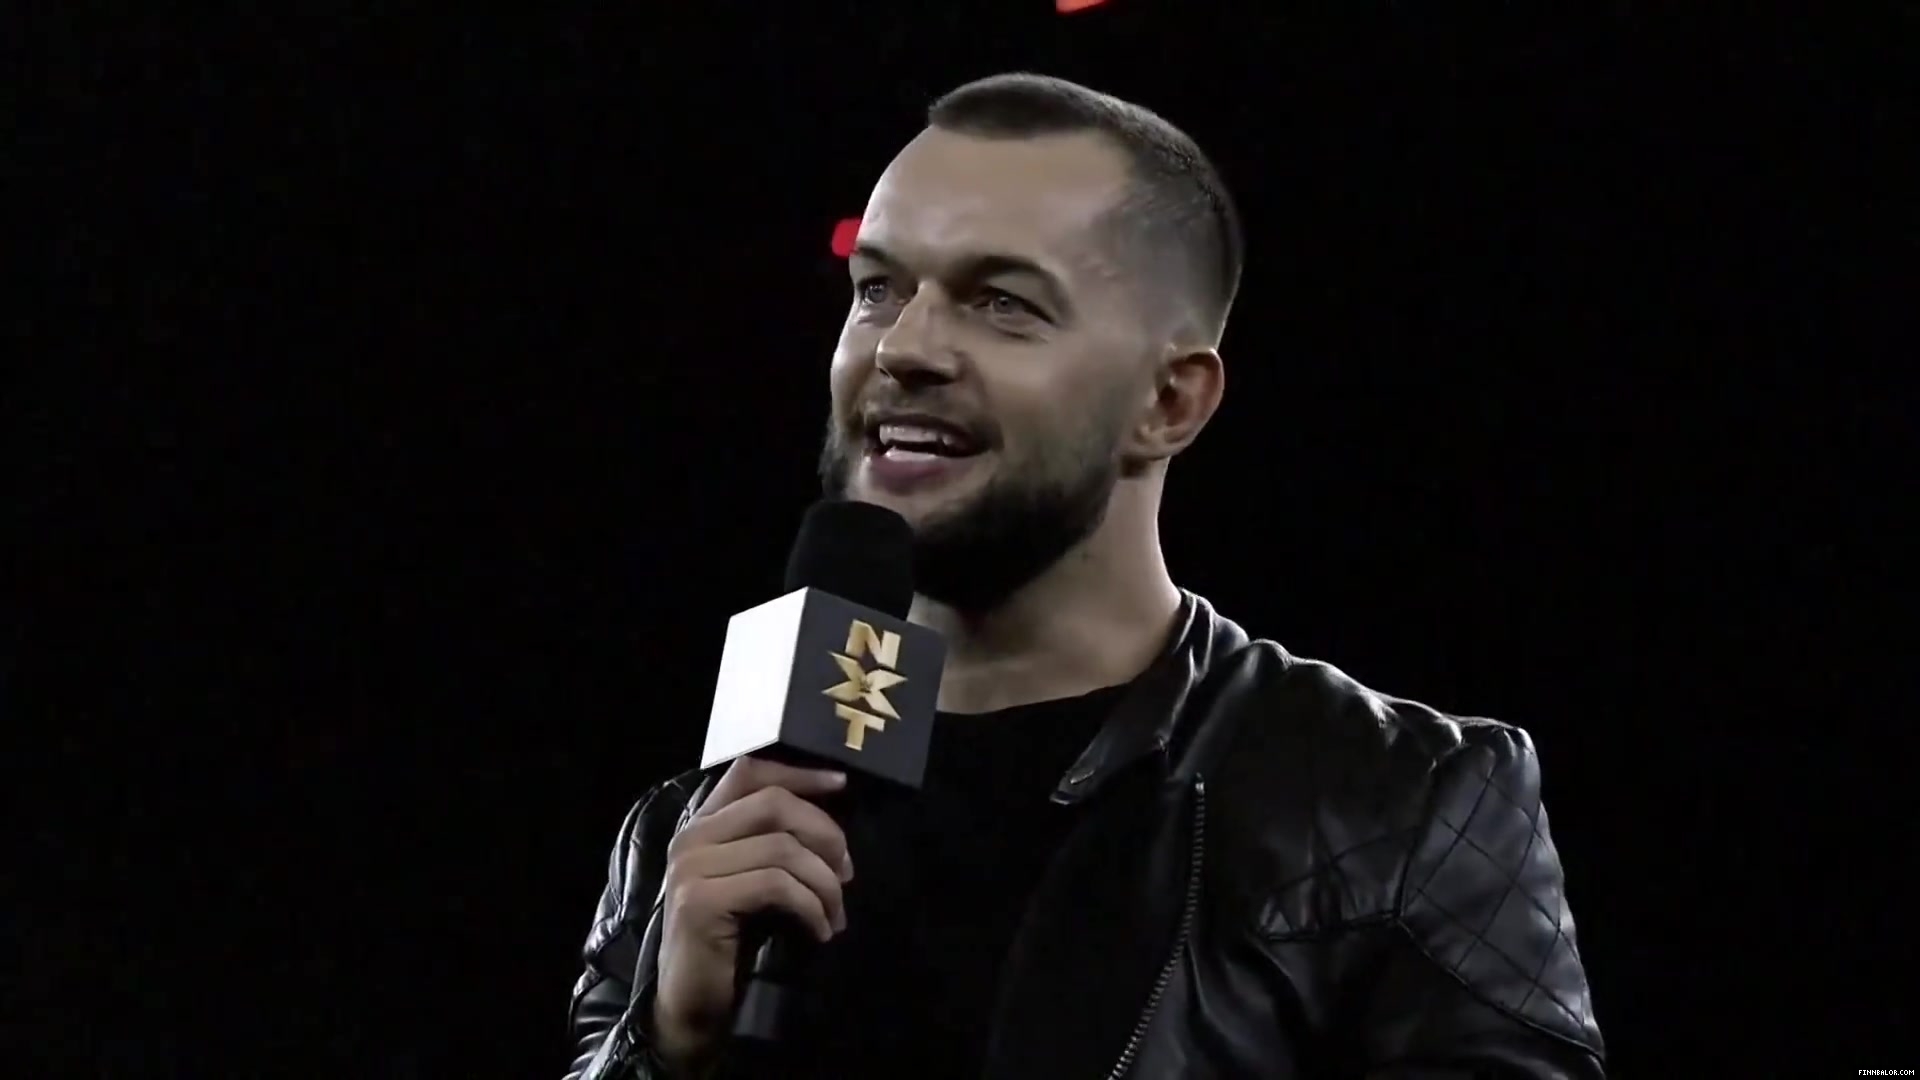 Finn_Balor___The_Rising_of_the_Prince_in_NXT_152.jpg